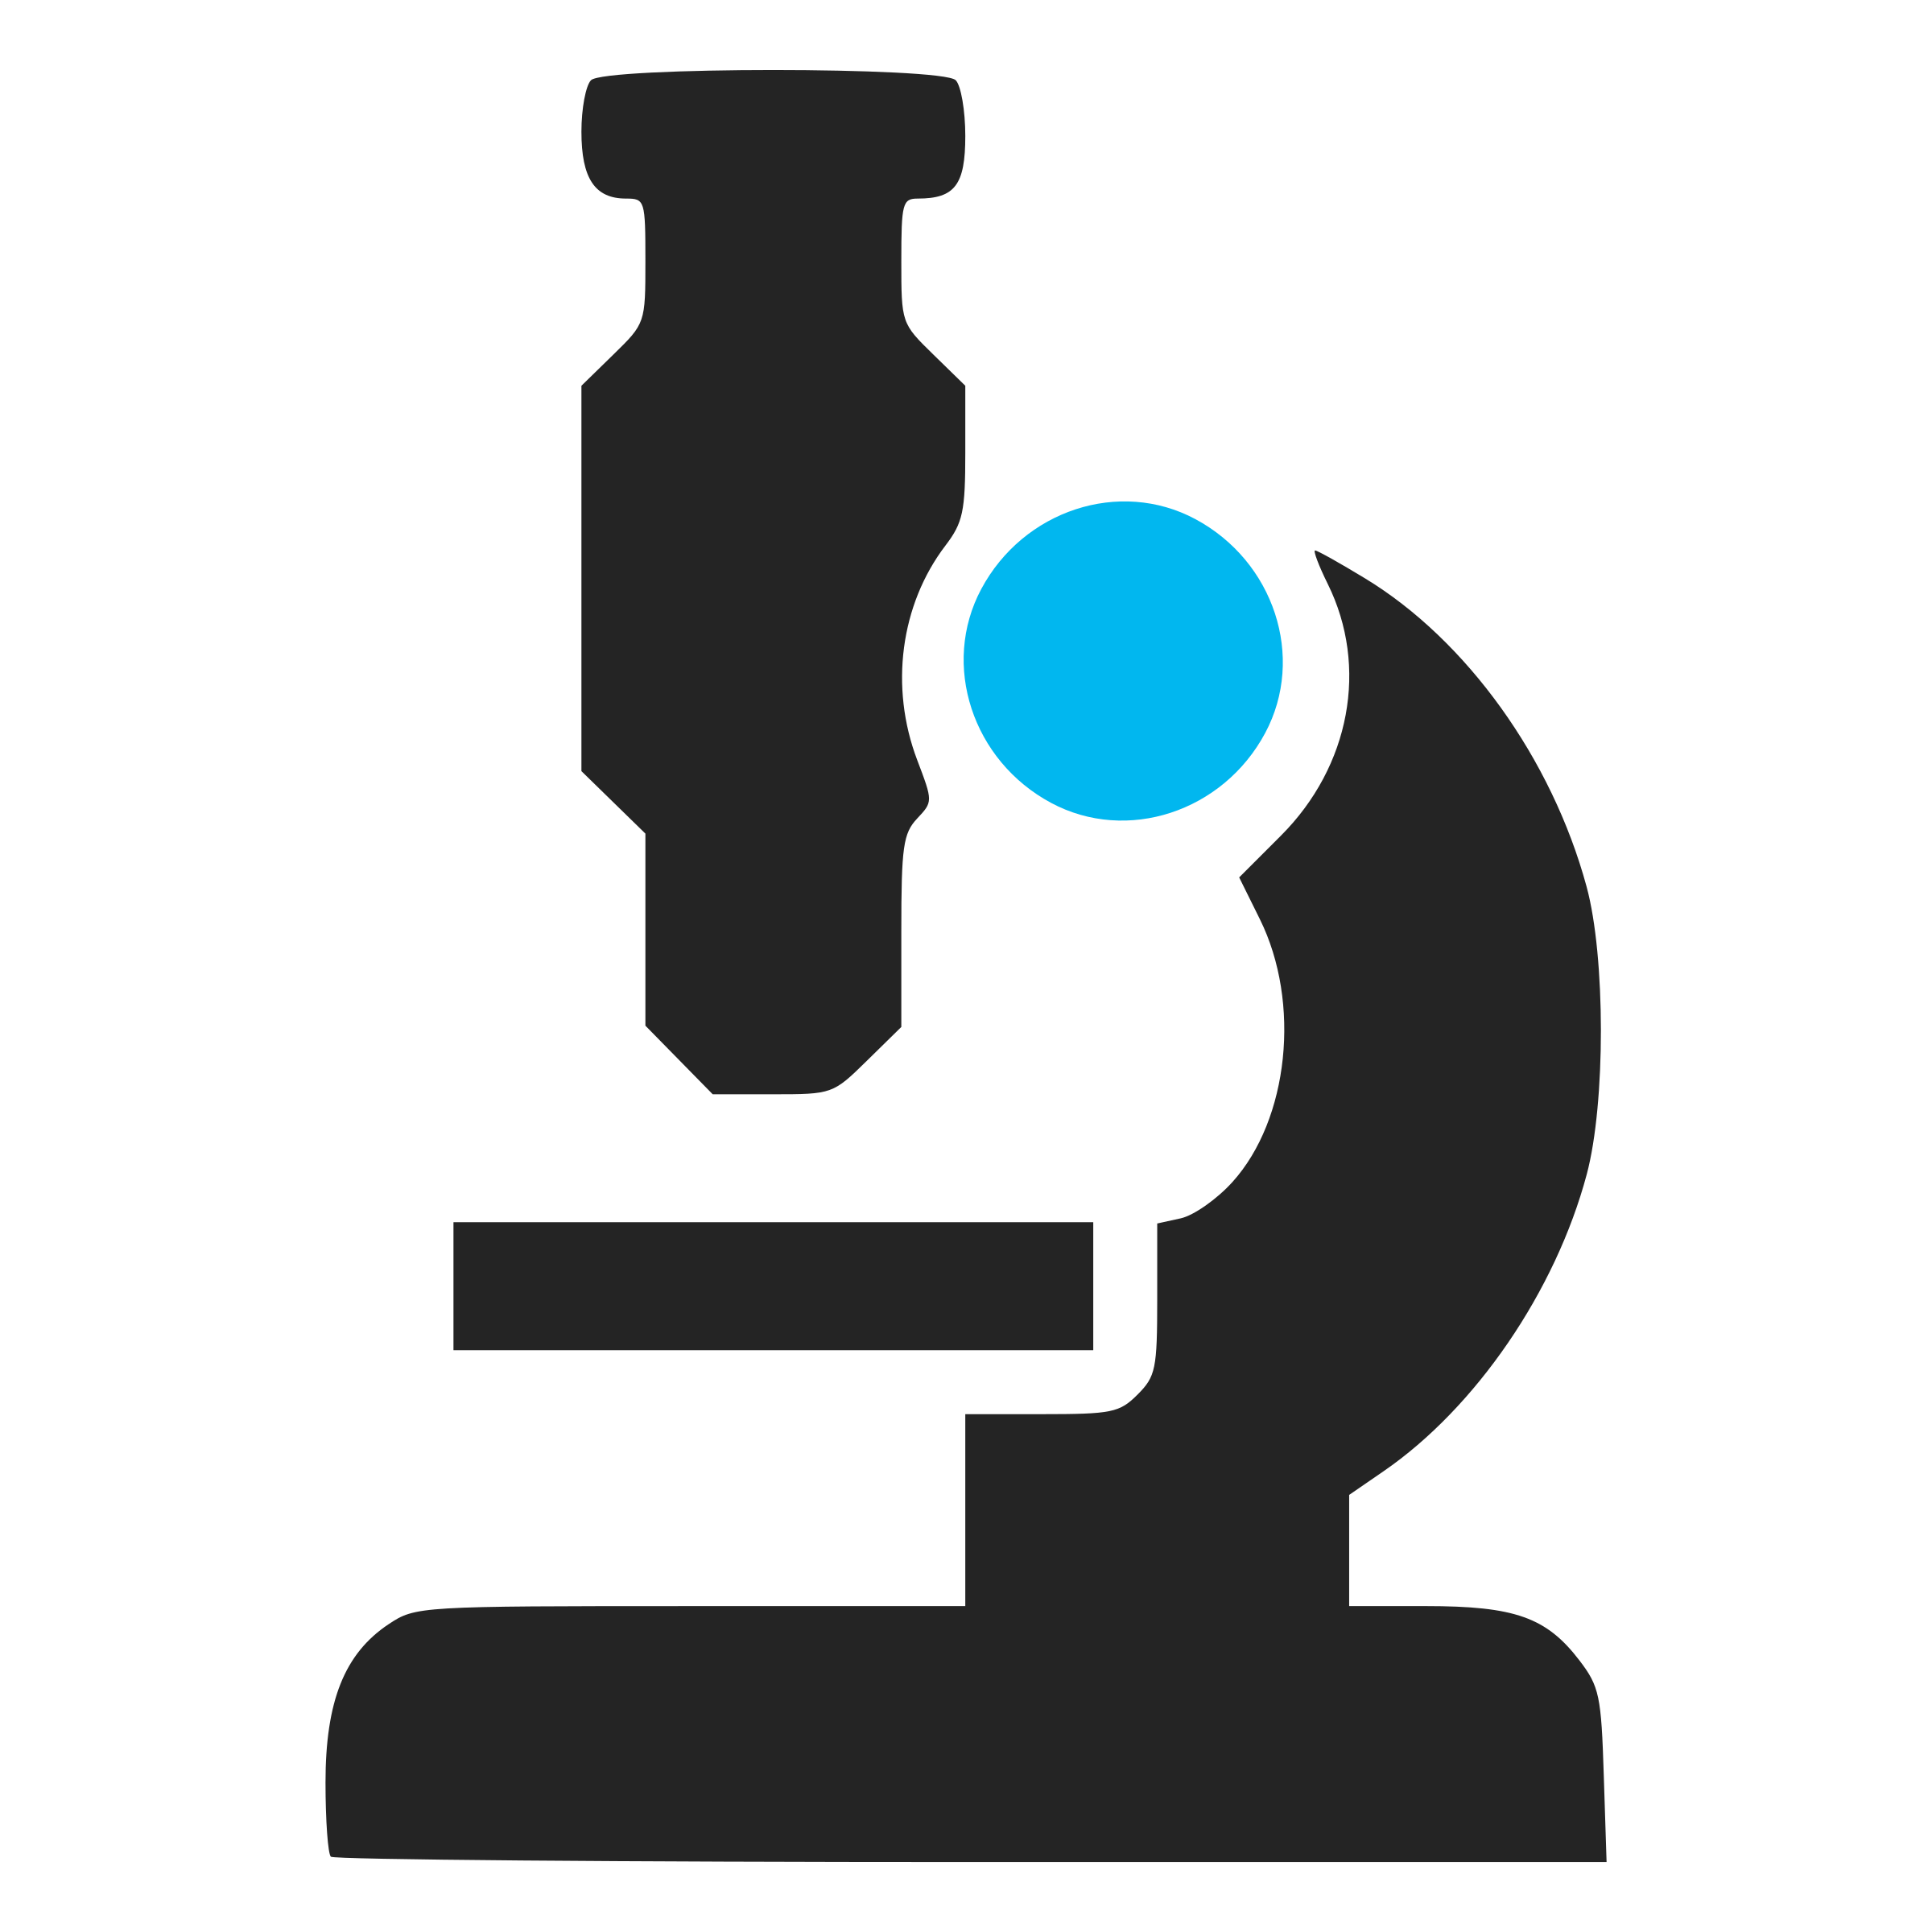 Microscope clipart free download clip art on